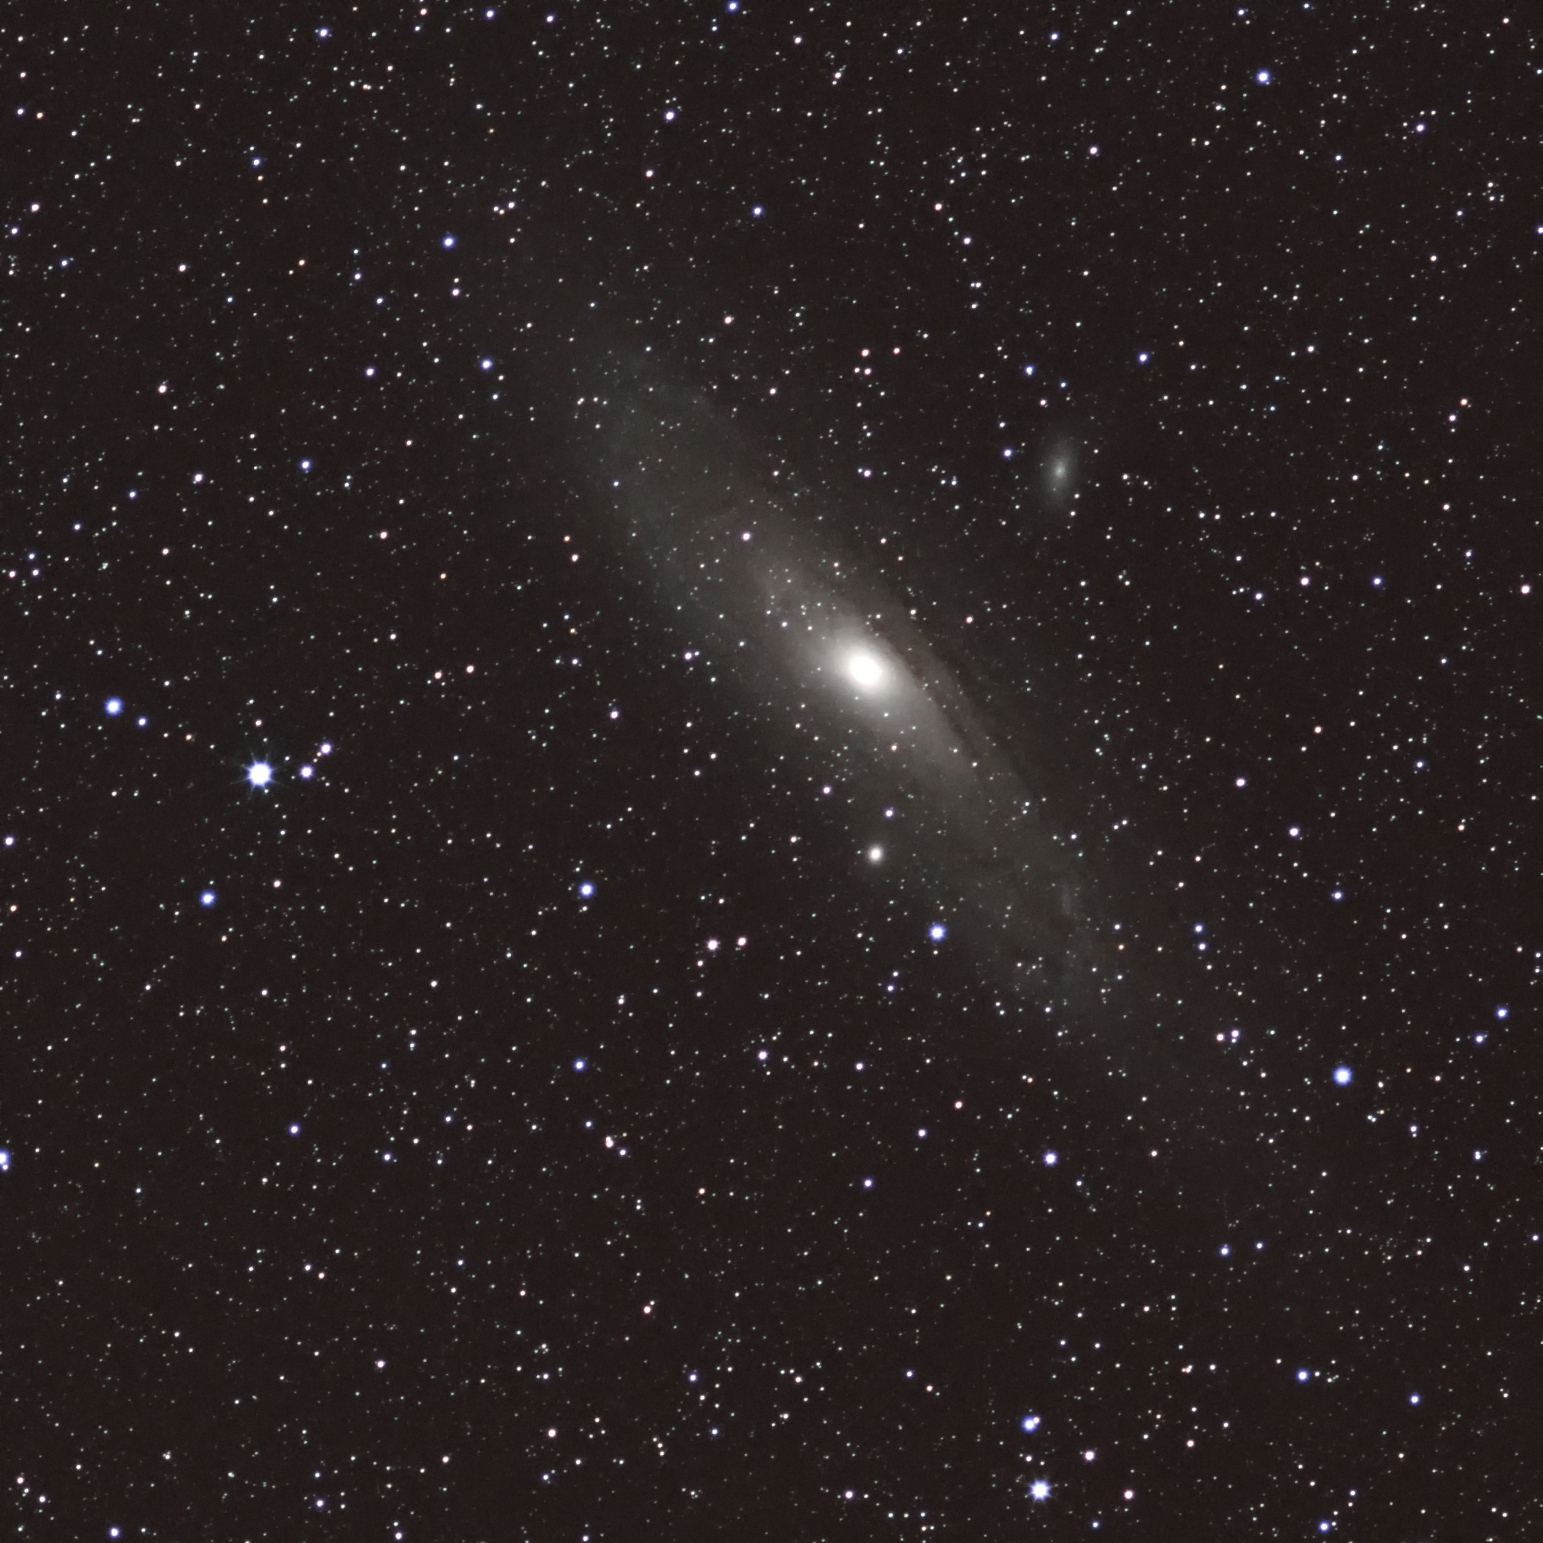 andromeda 14 stacked affinity edit 6 PSE edit 5 dfine to reduce noise.jpg